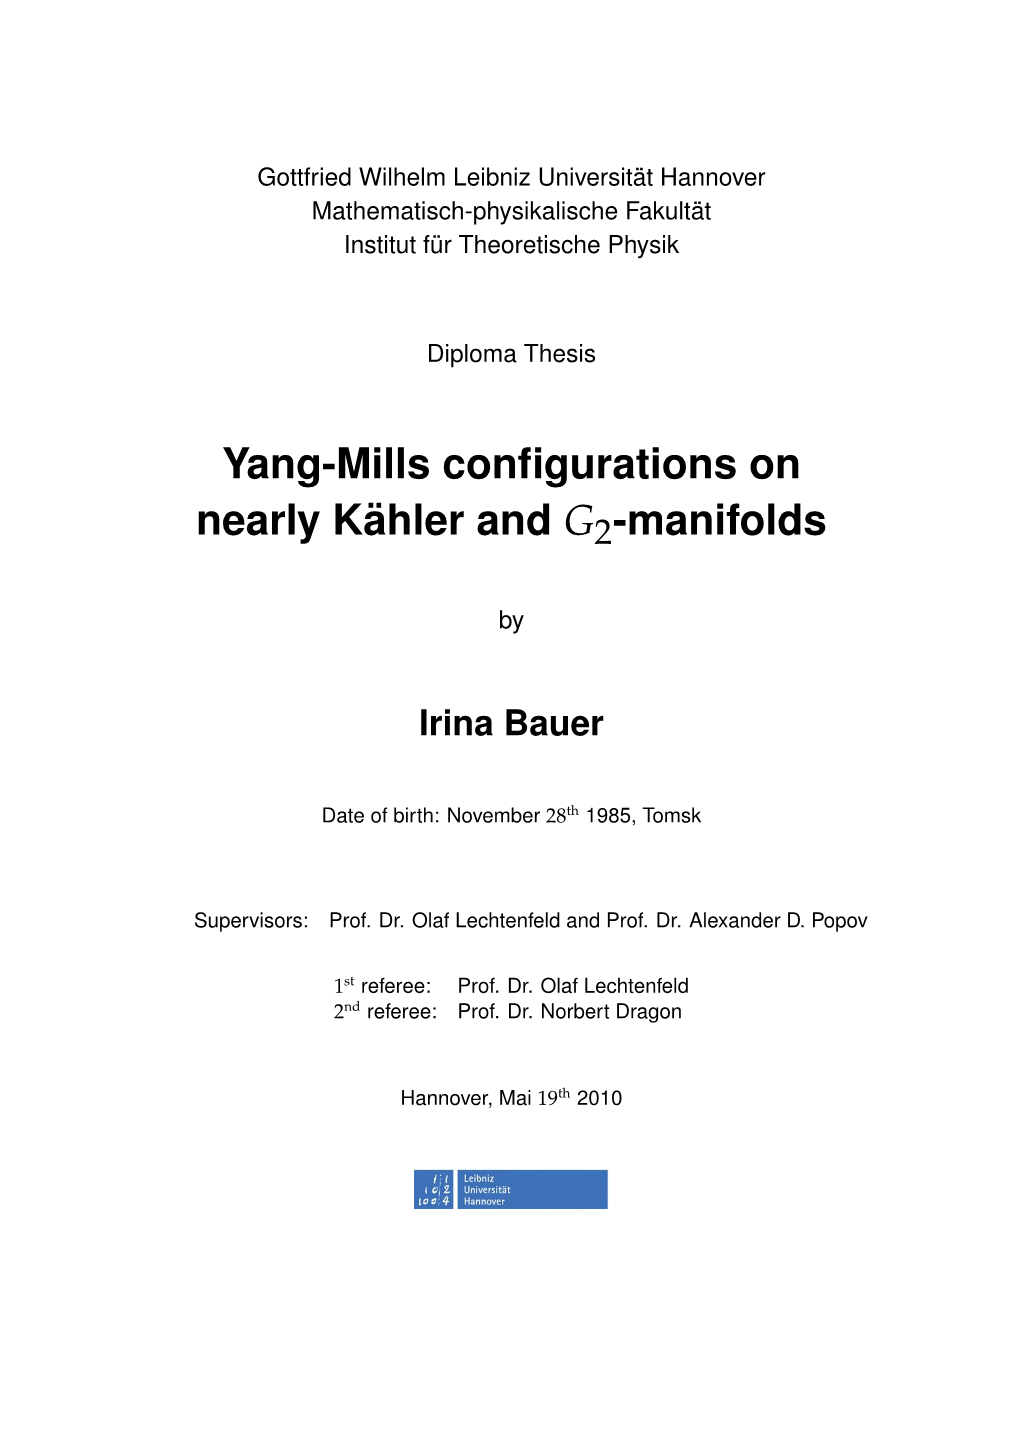 Yang-Mills Configurations on Nearly K¨Ahler and G2